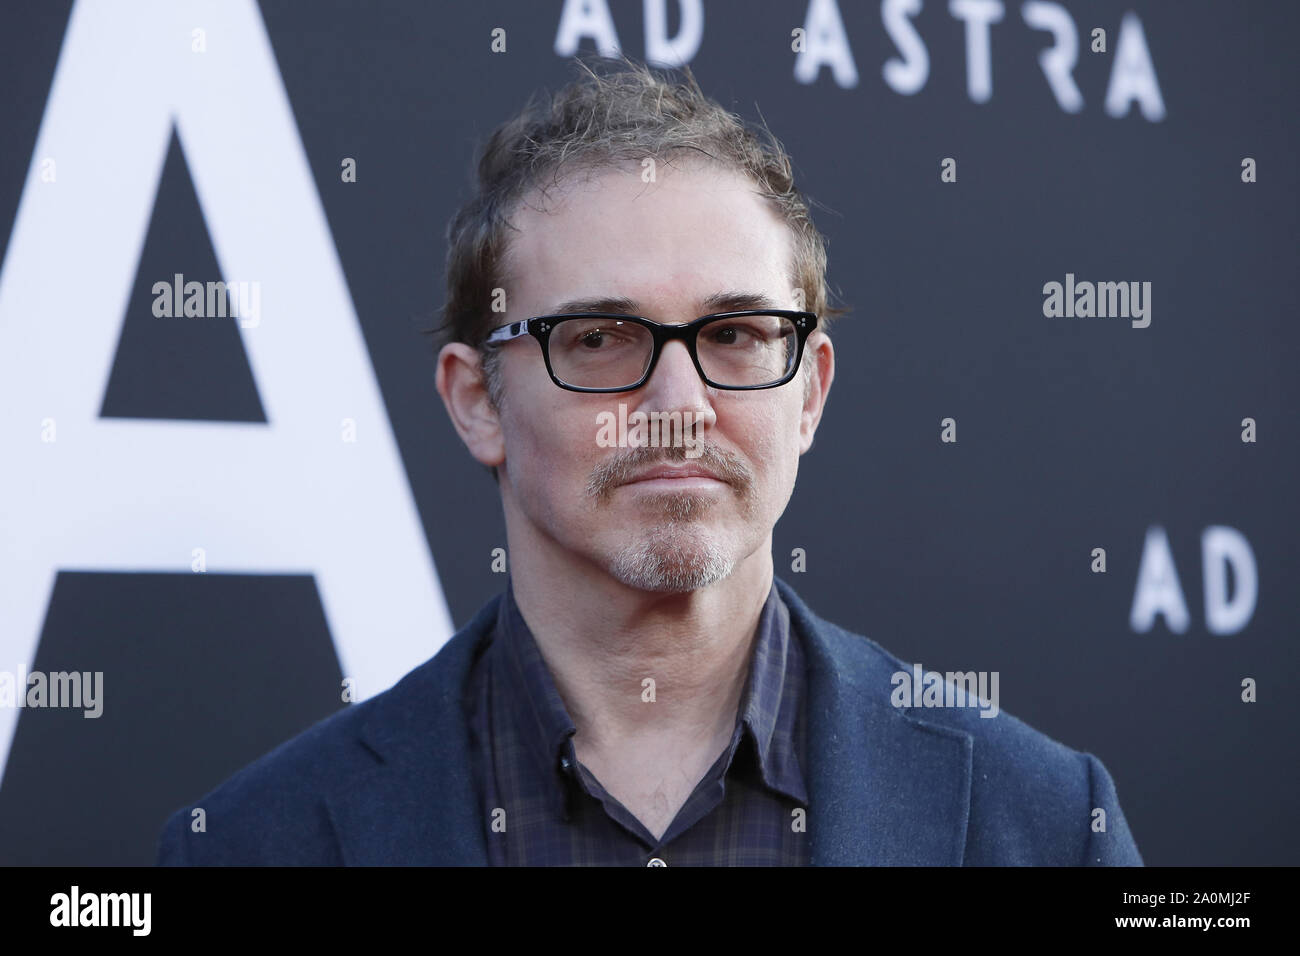 September 18, 2019, Los Angeles, CA, USA: LOS ANGELES - SEP 18:  Loren Dean at the Ad Astra Premiere at the ArcLight Theater on September 18, 2019 in Los Angeles, CA (Credit Image: © Kay Blake/ZUMA Wire) Stock Photo